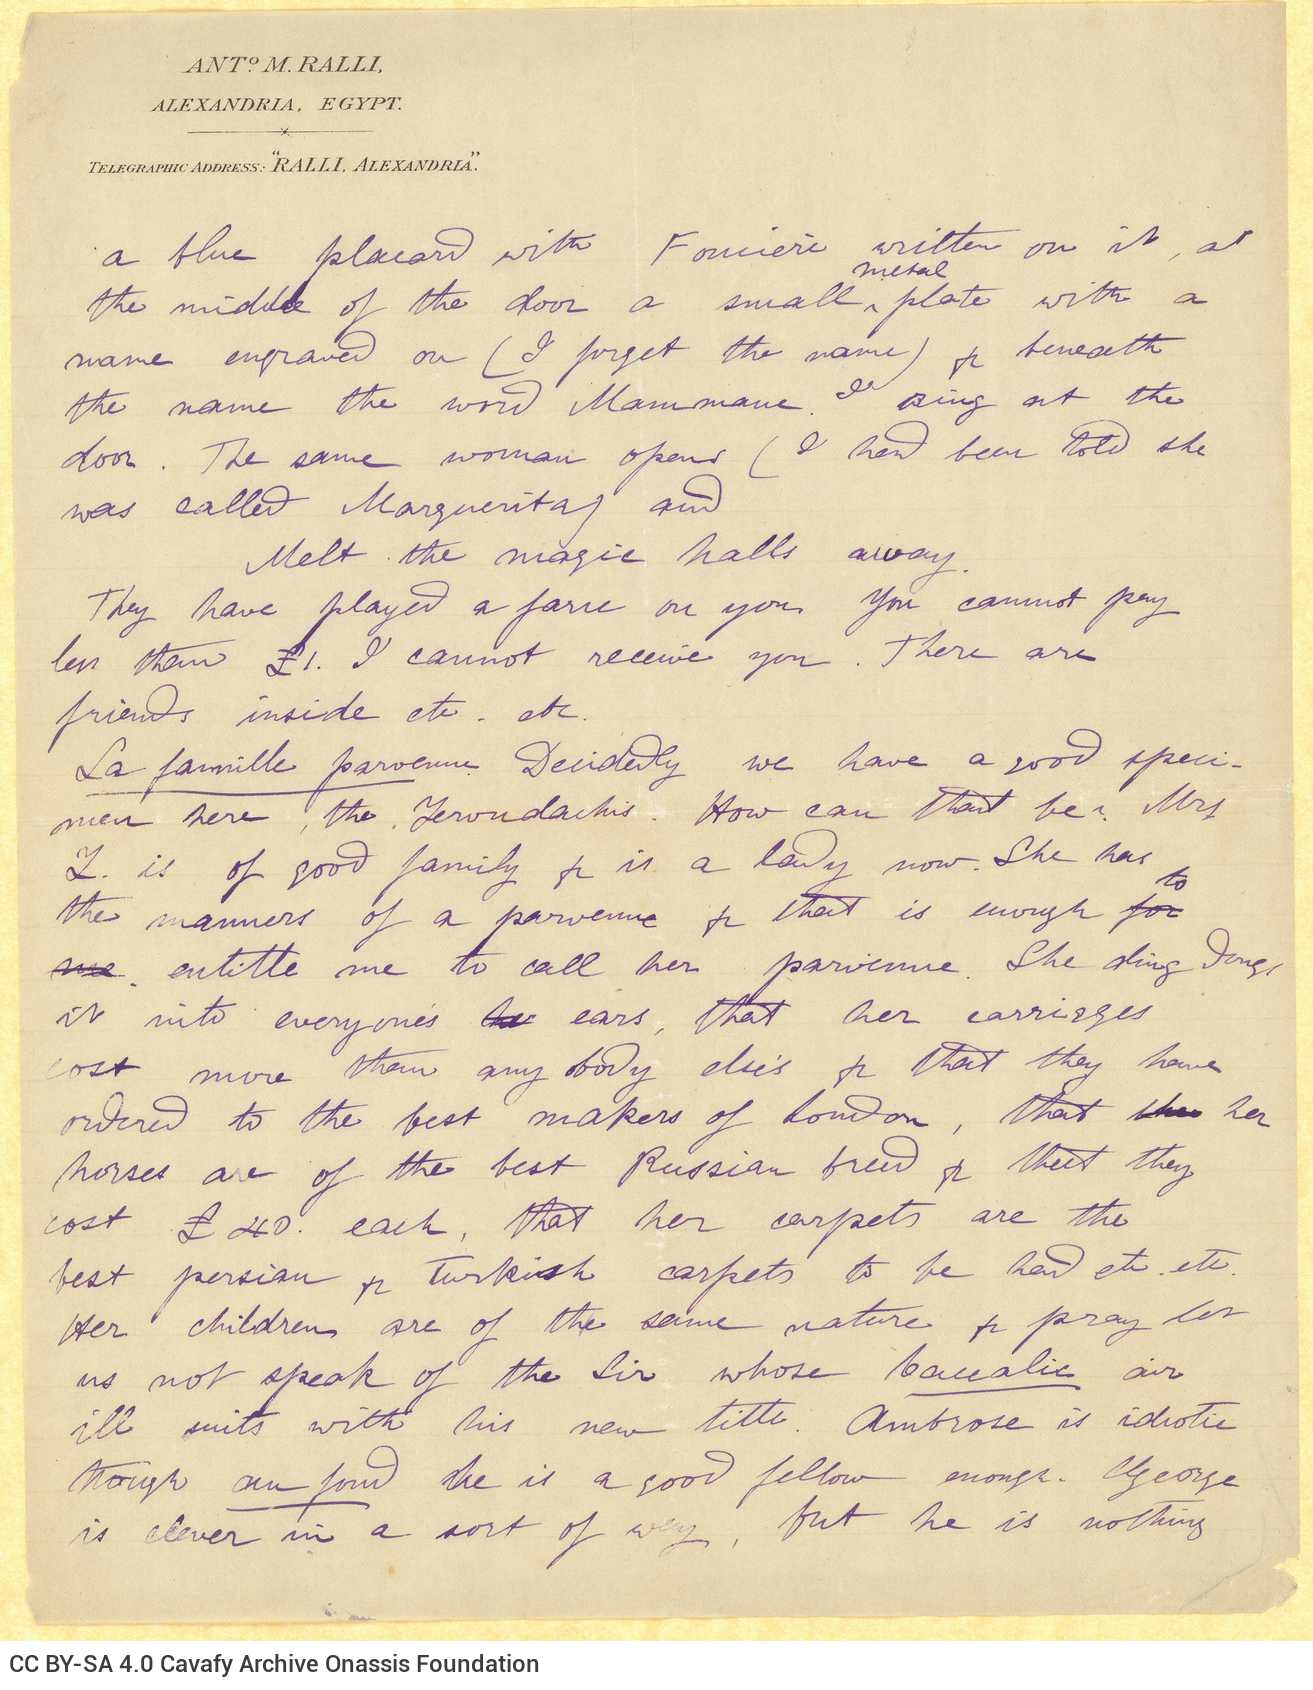 Handwritten letter by Mike Ralli to Cavafy on the recto of four sheets. It is a reply to a letter dated 28 February. Extensiv